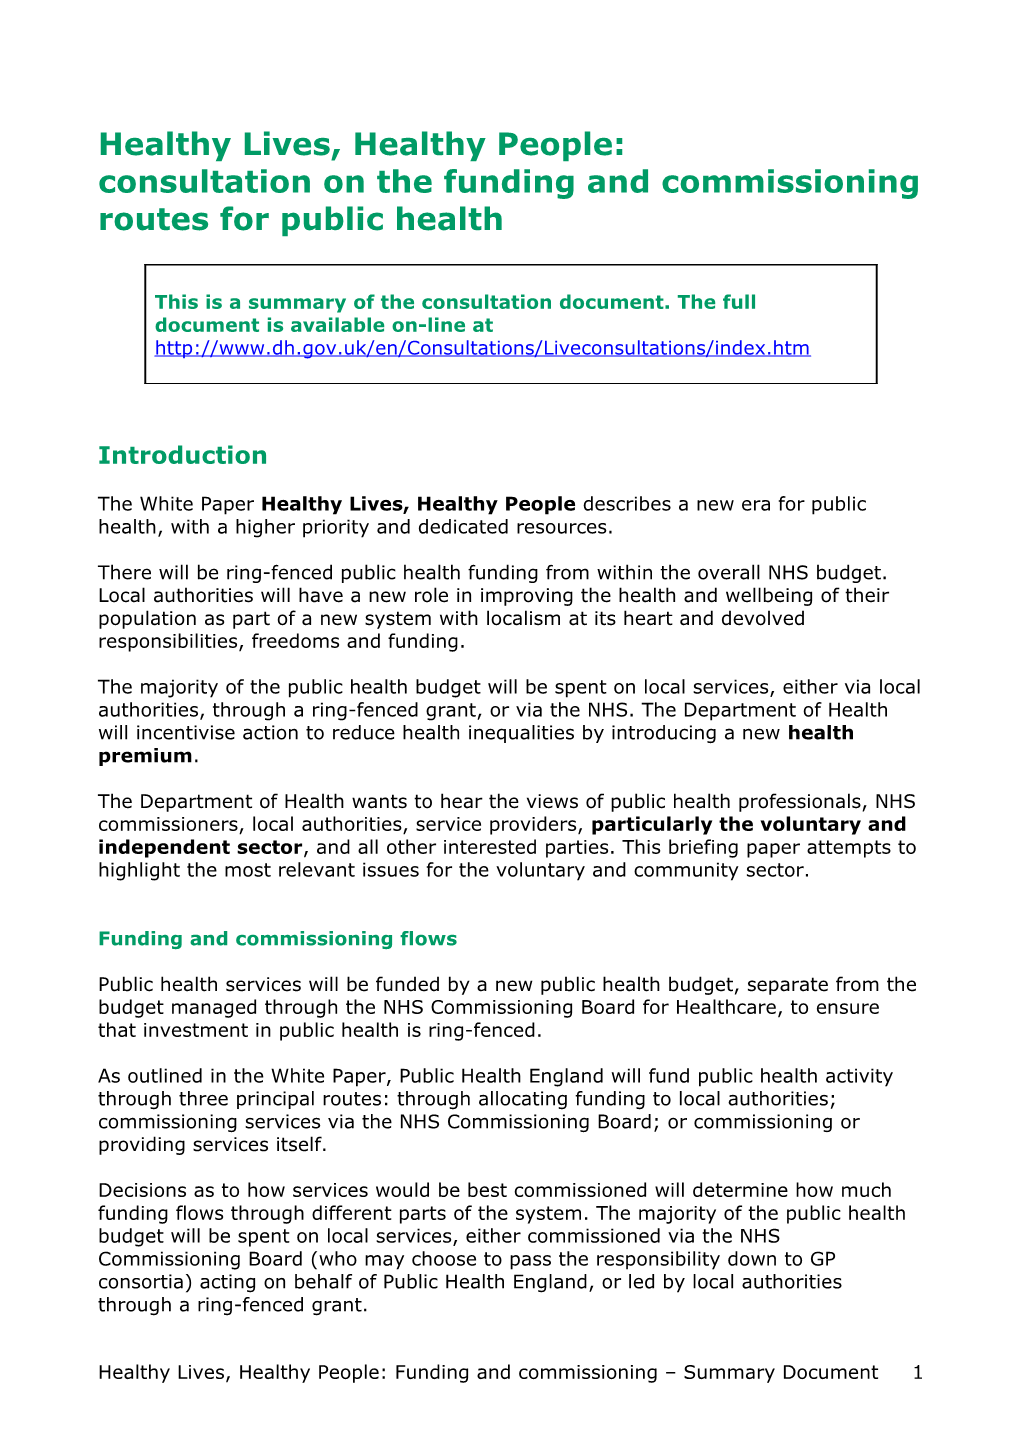 Healthy Lives Healthy People Funding and Commissioning